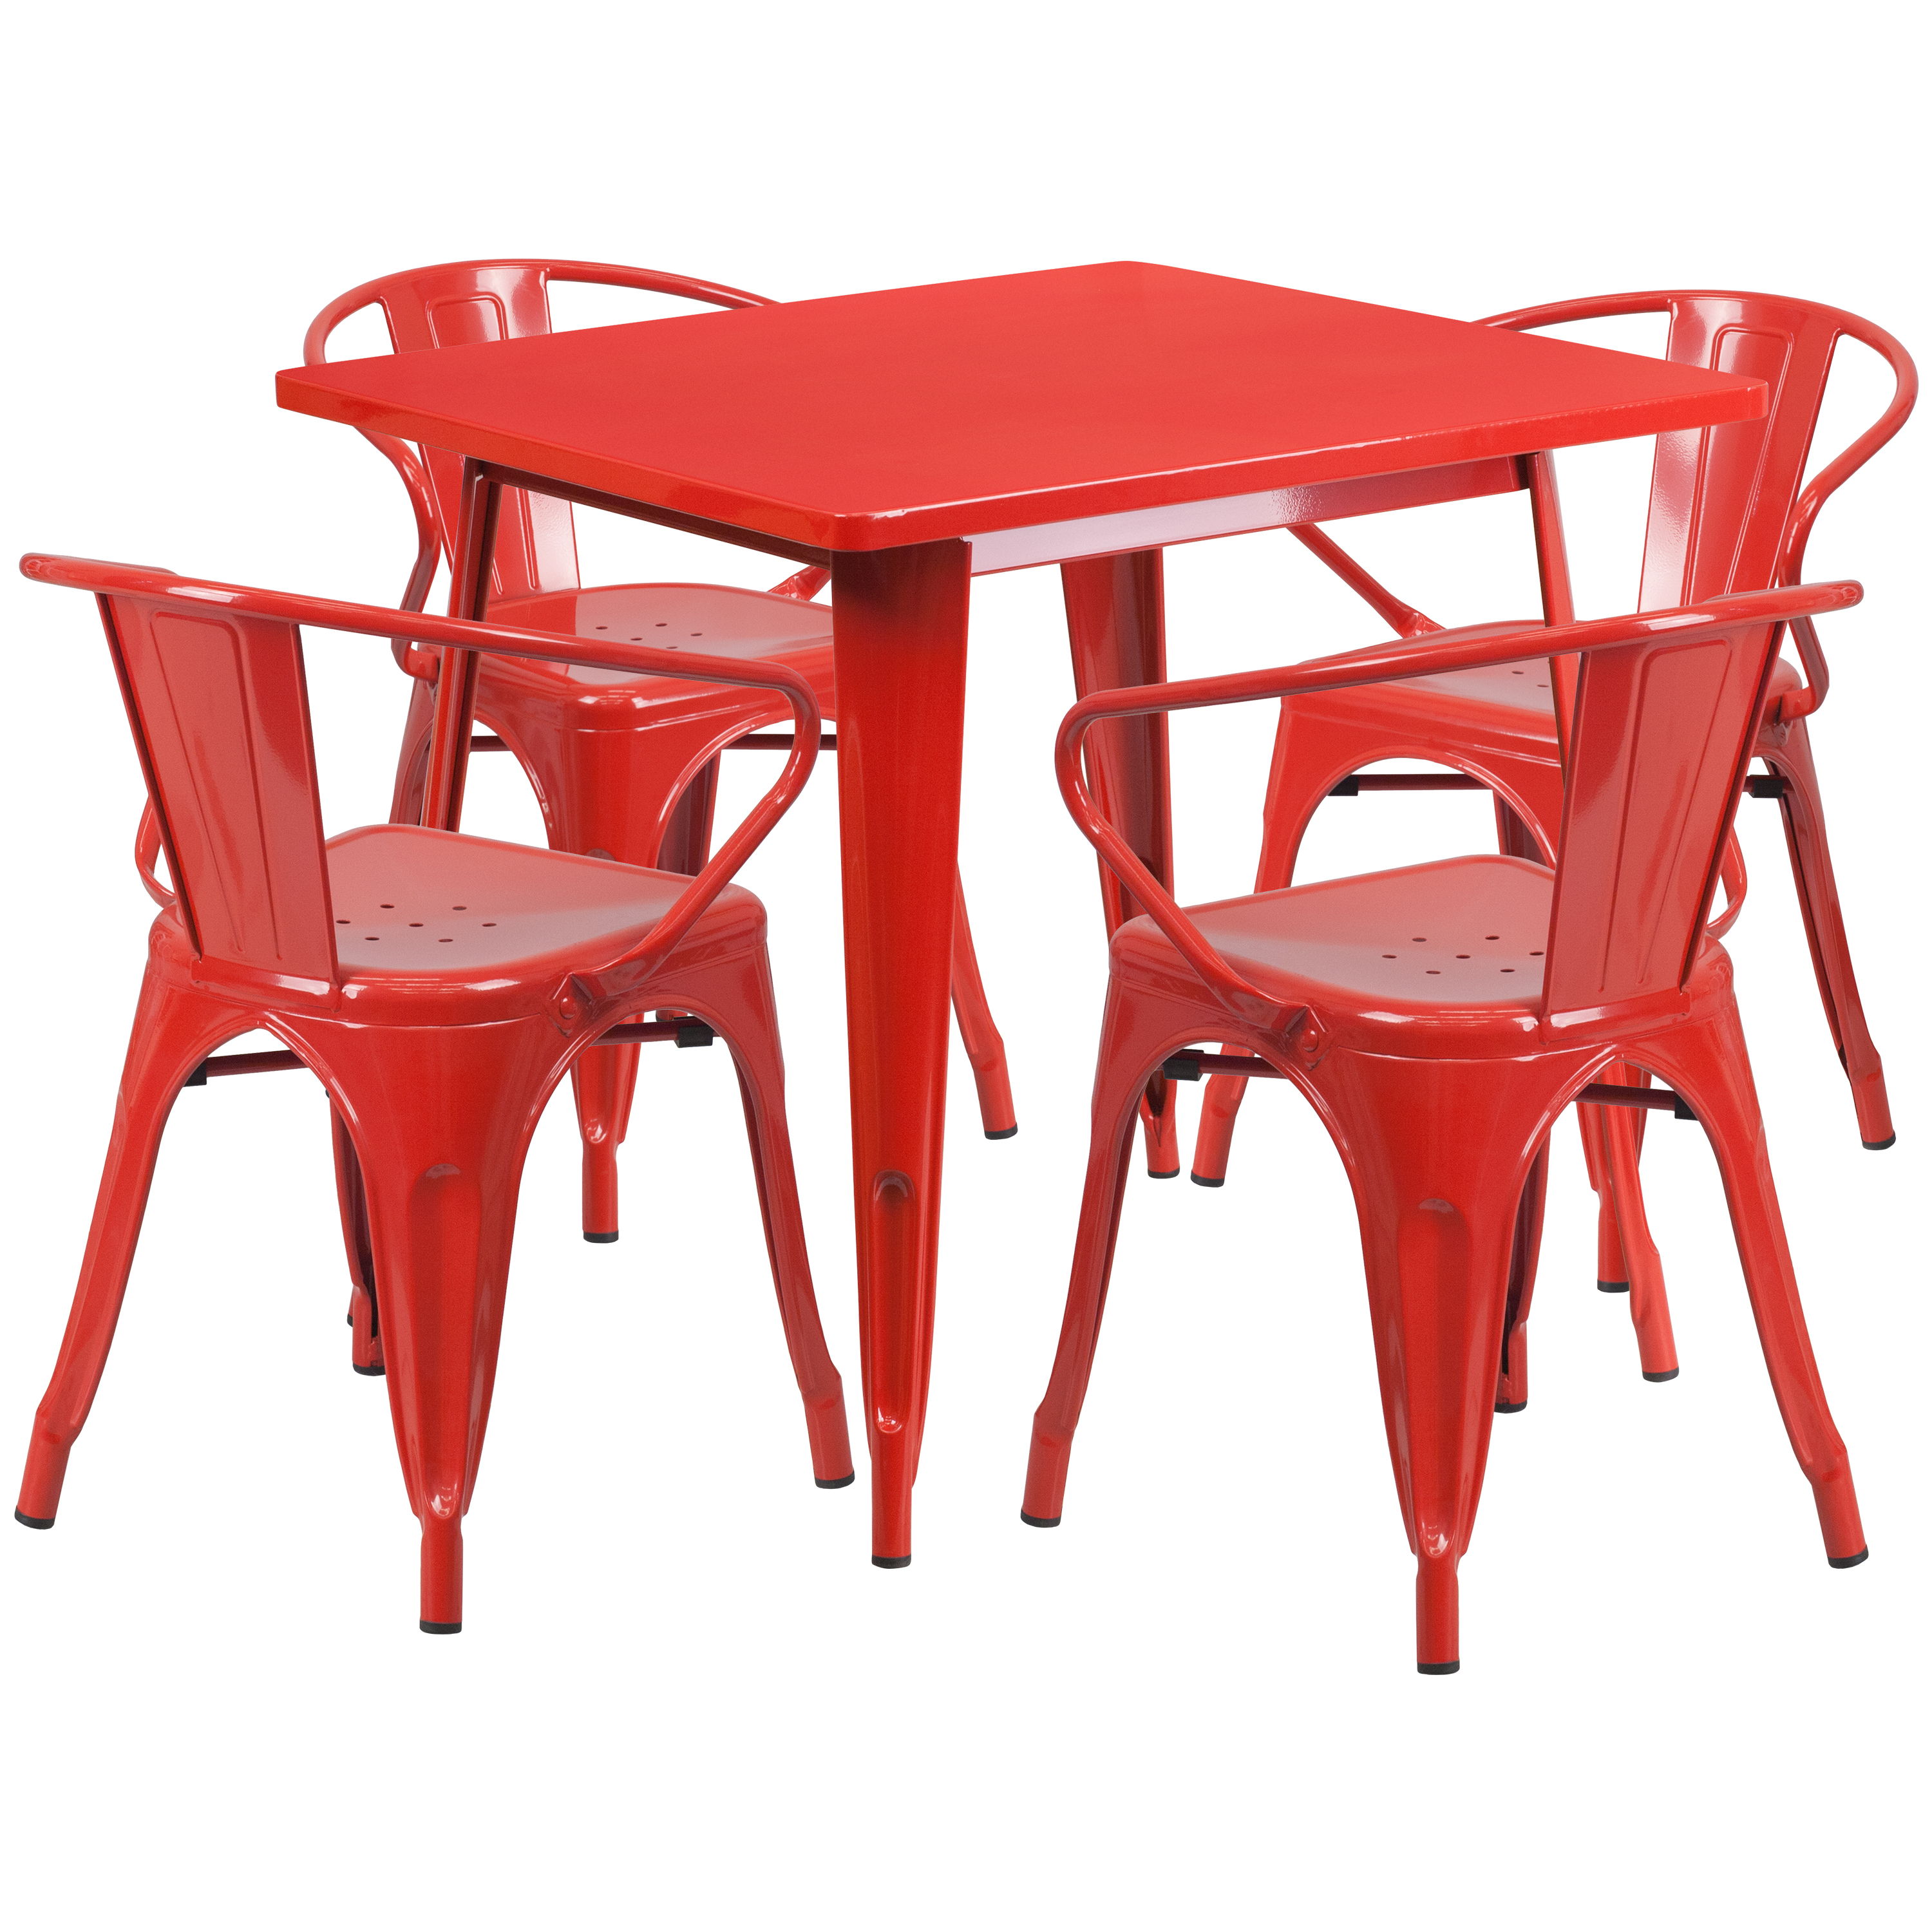 Flash Furniture Grady Commercial Grade 31.5" Square Red Metal Indoor-Outdoor Table Set with 4 Arm Chairs - image 2 of 5